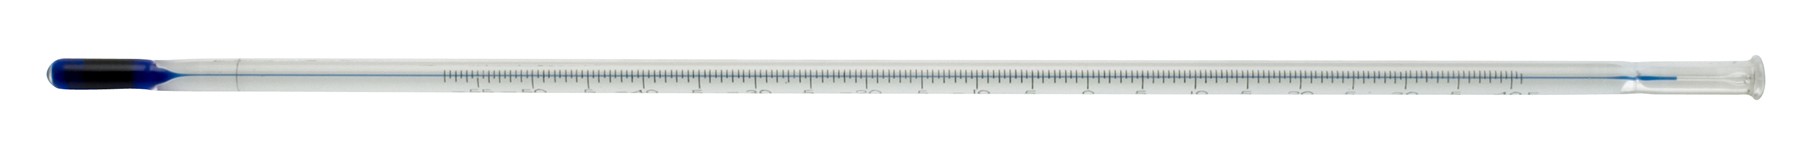 SP Bel-Art, H-B DURAC Plus ASTM Like Liquid-In-Glass Laboratory Thermometer; 5C / Cloud and Pour, 108mm Immersion, -38 to 50C, Organic Liquid Fill